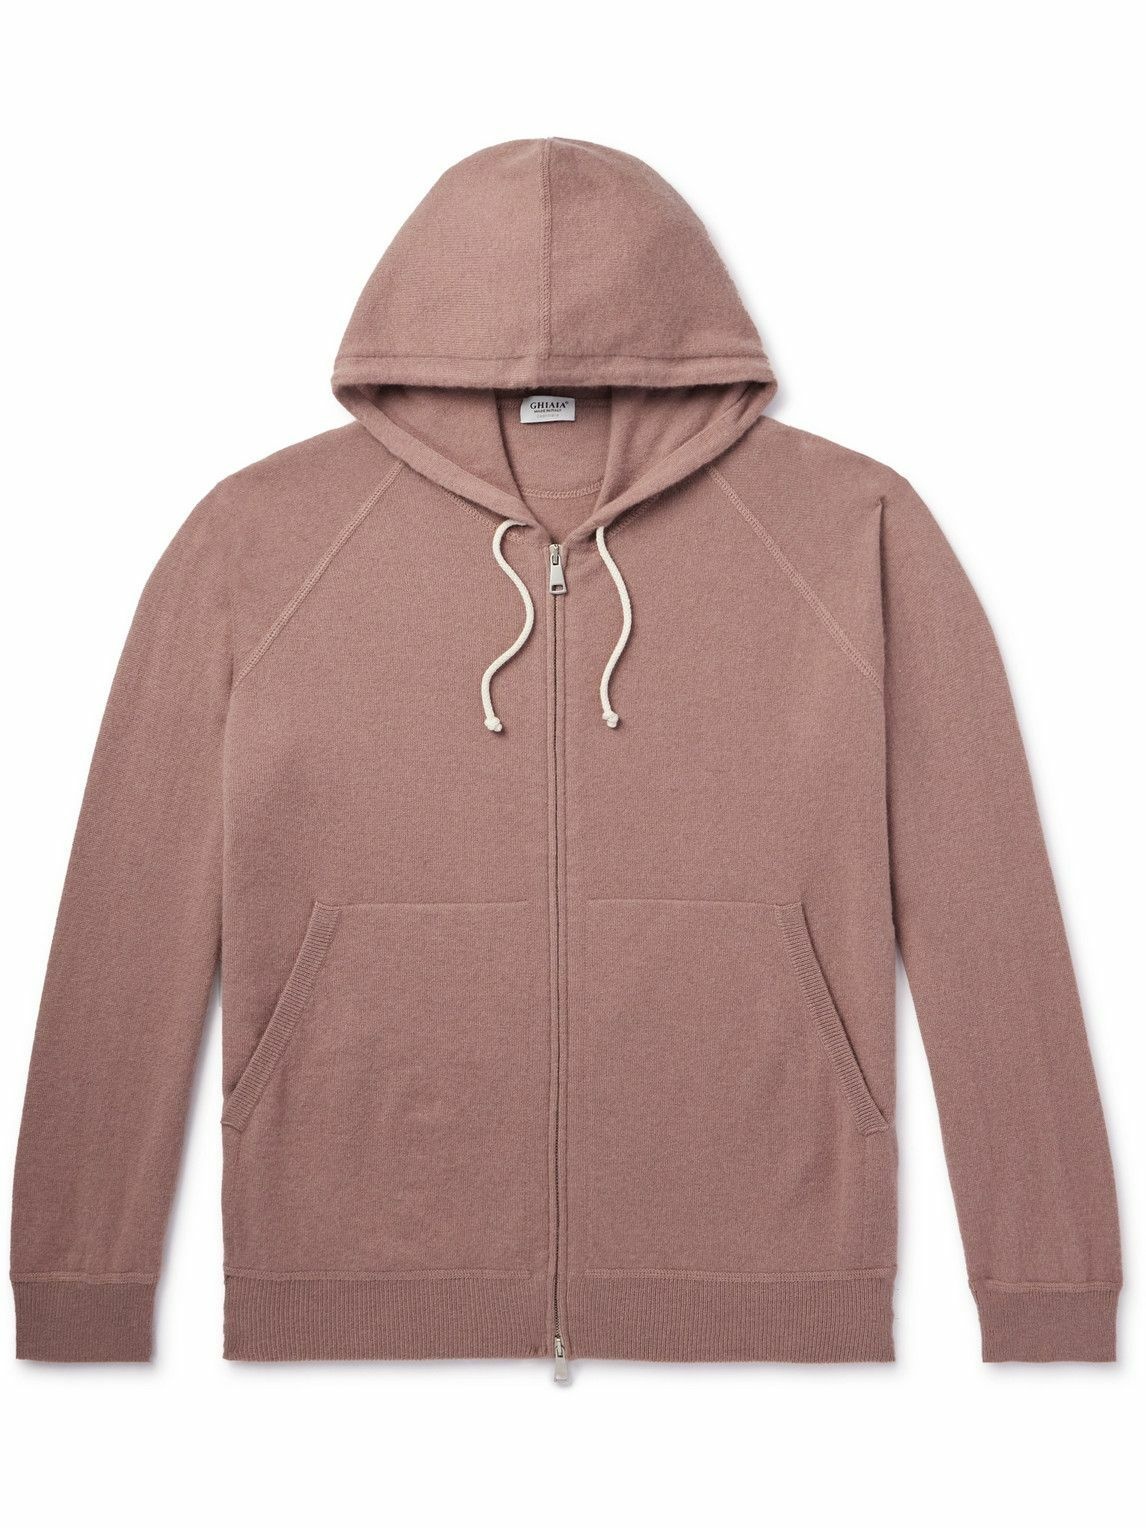 Ghiaia Cashmere - Cashmere Zip-Up Hoodie - Pink Ghiaia Cashmere